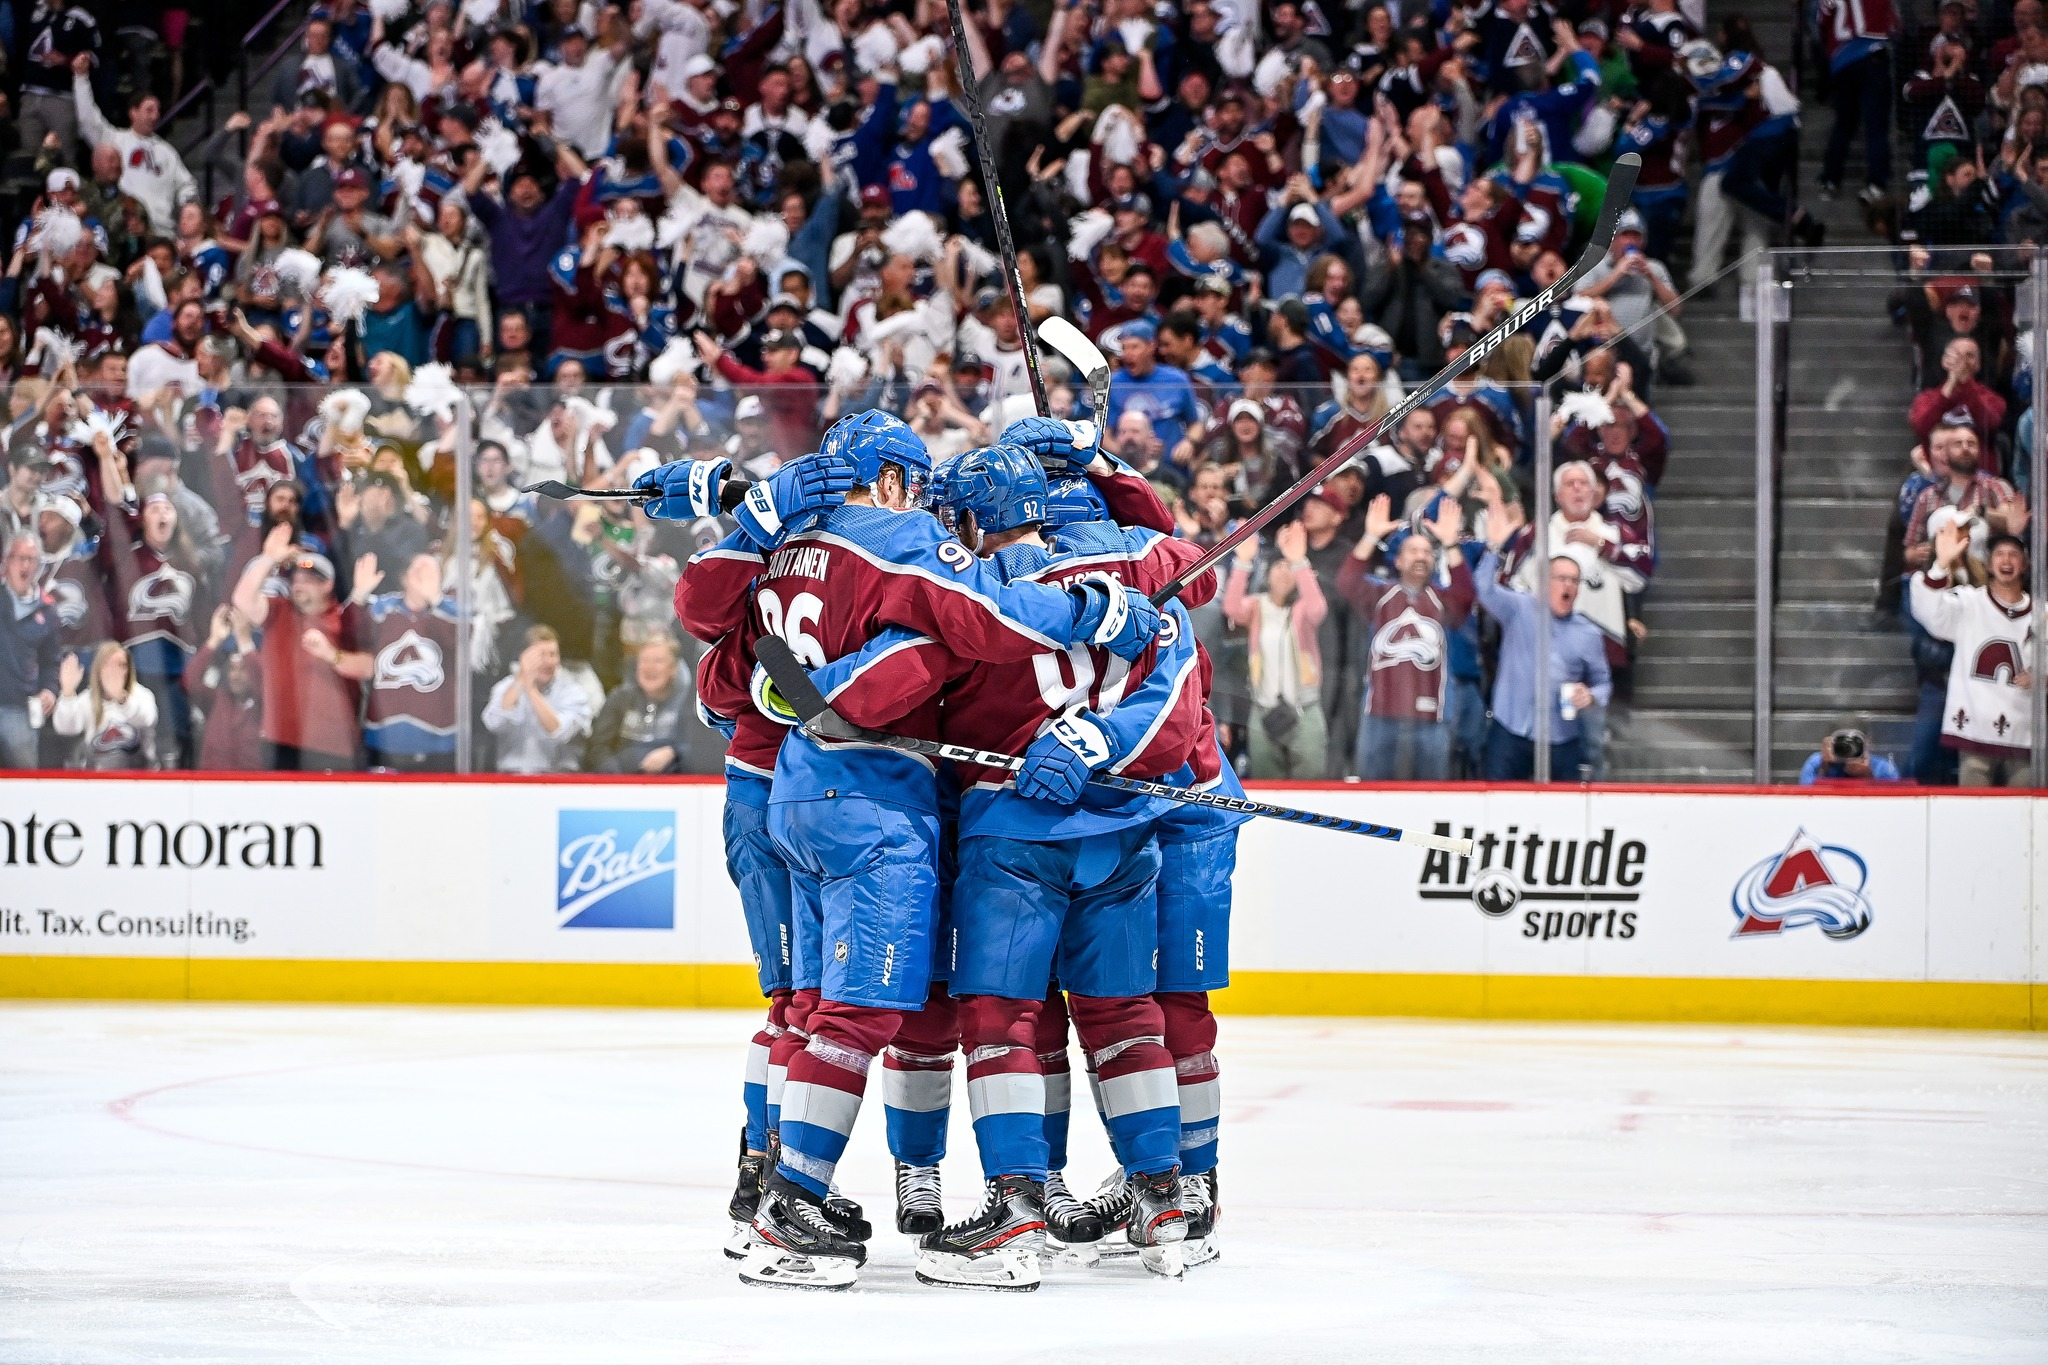 Colorado Avalanche hockey players during a game 